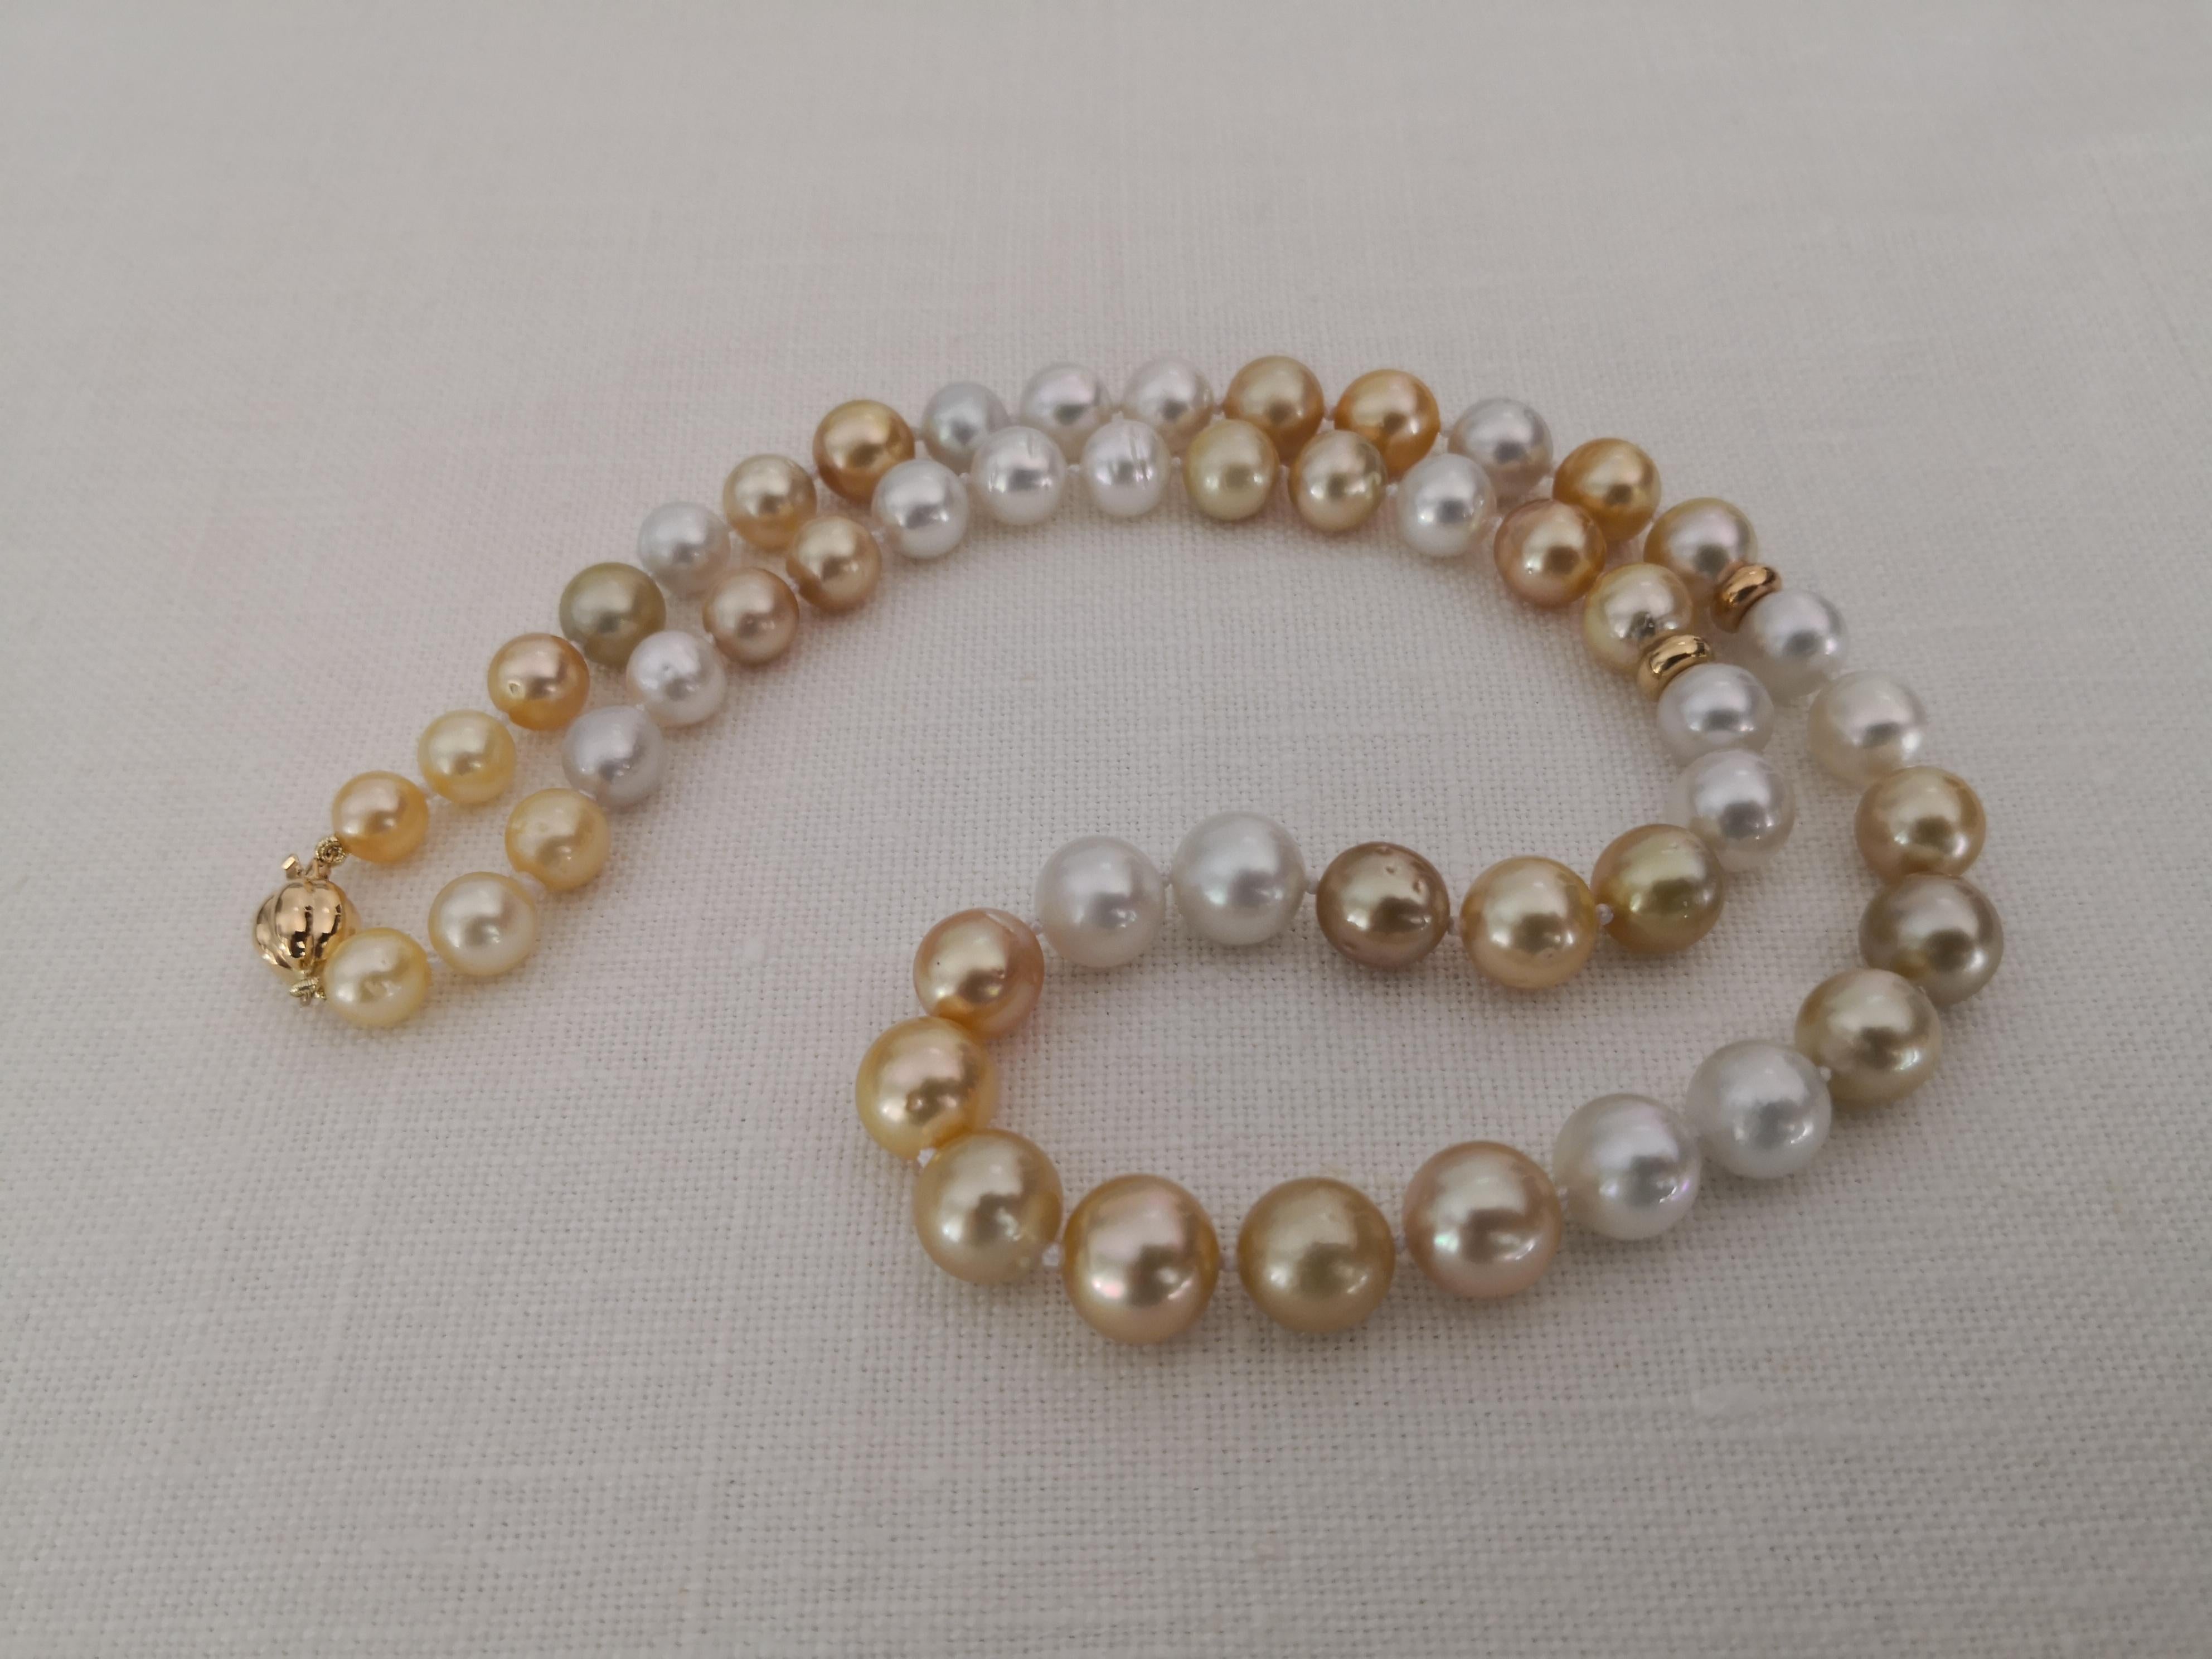 A  Natural  Colors  South Sea Pearls Necklace

- 50 pearls in the necklace

- Size of Pearls from 8-11 mm 

- Natural Colors: Golden, White 

- Natural High Luster

- Pearl of round shape

- 53 cm long necklace hand-knotted

- Clasp manufactured in